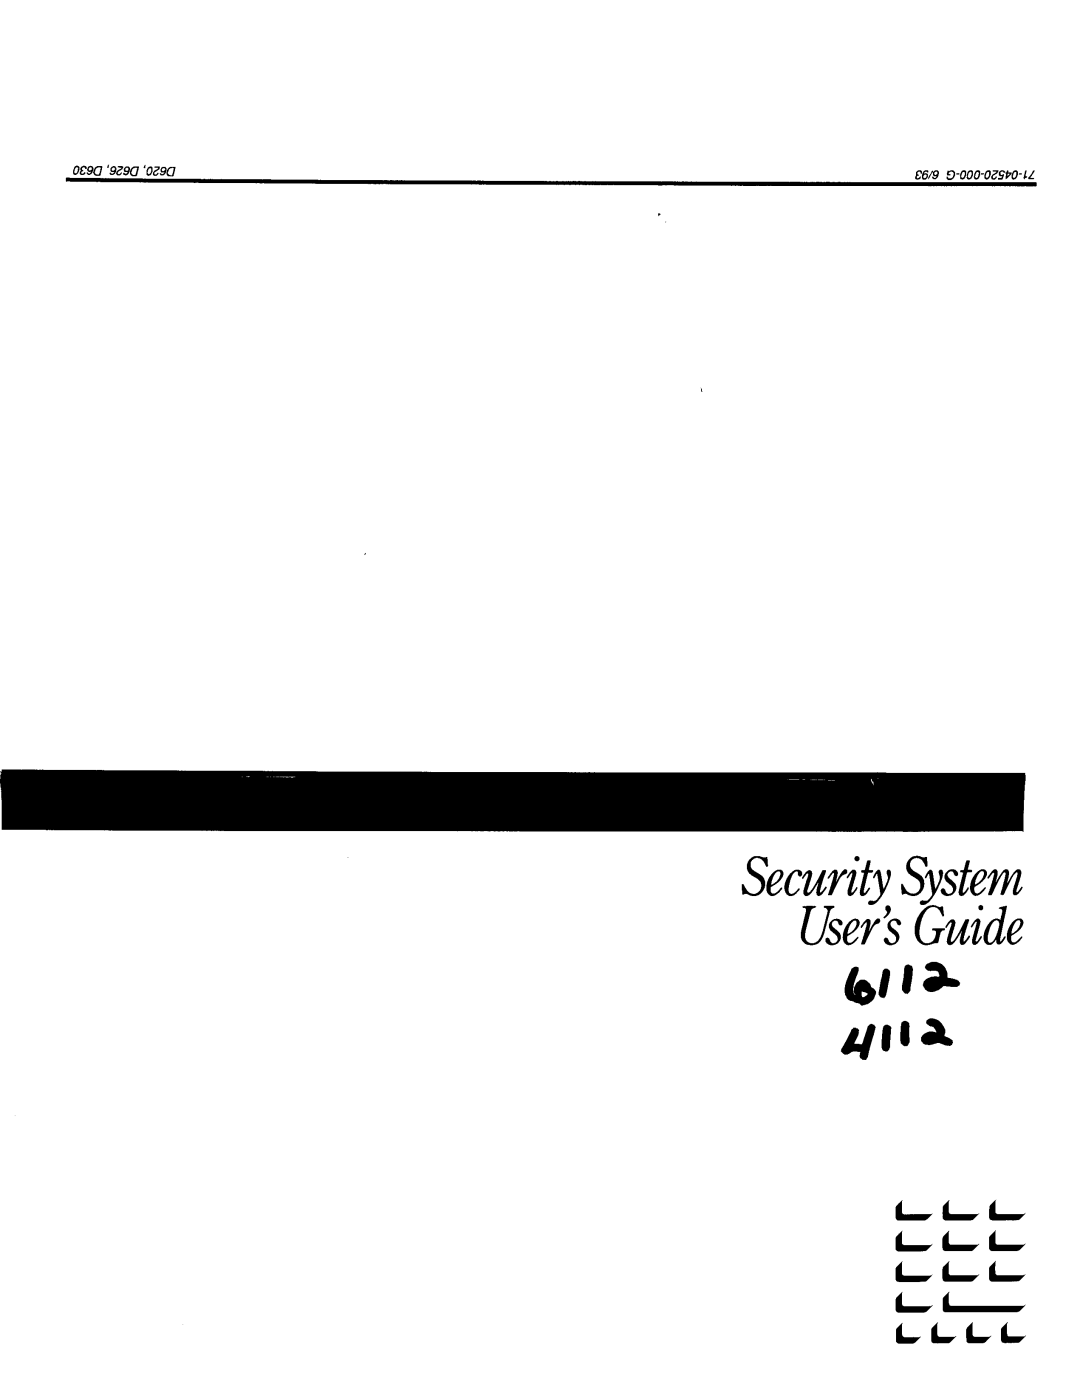 ADT Security Services 6112, 4112 manual 